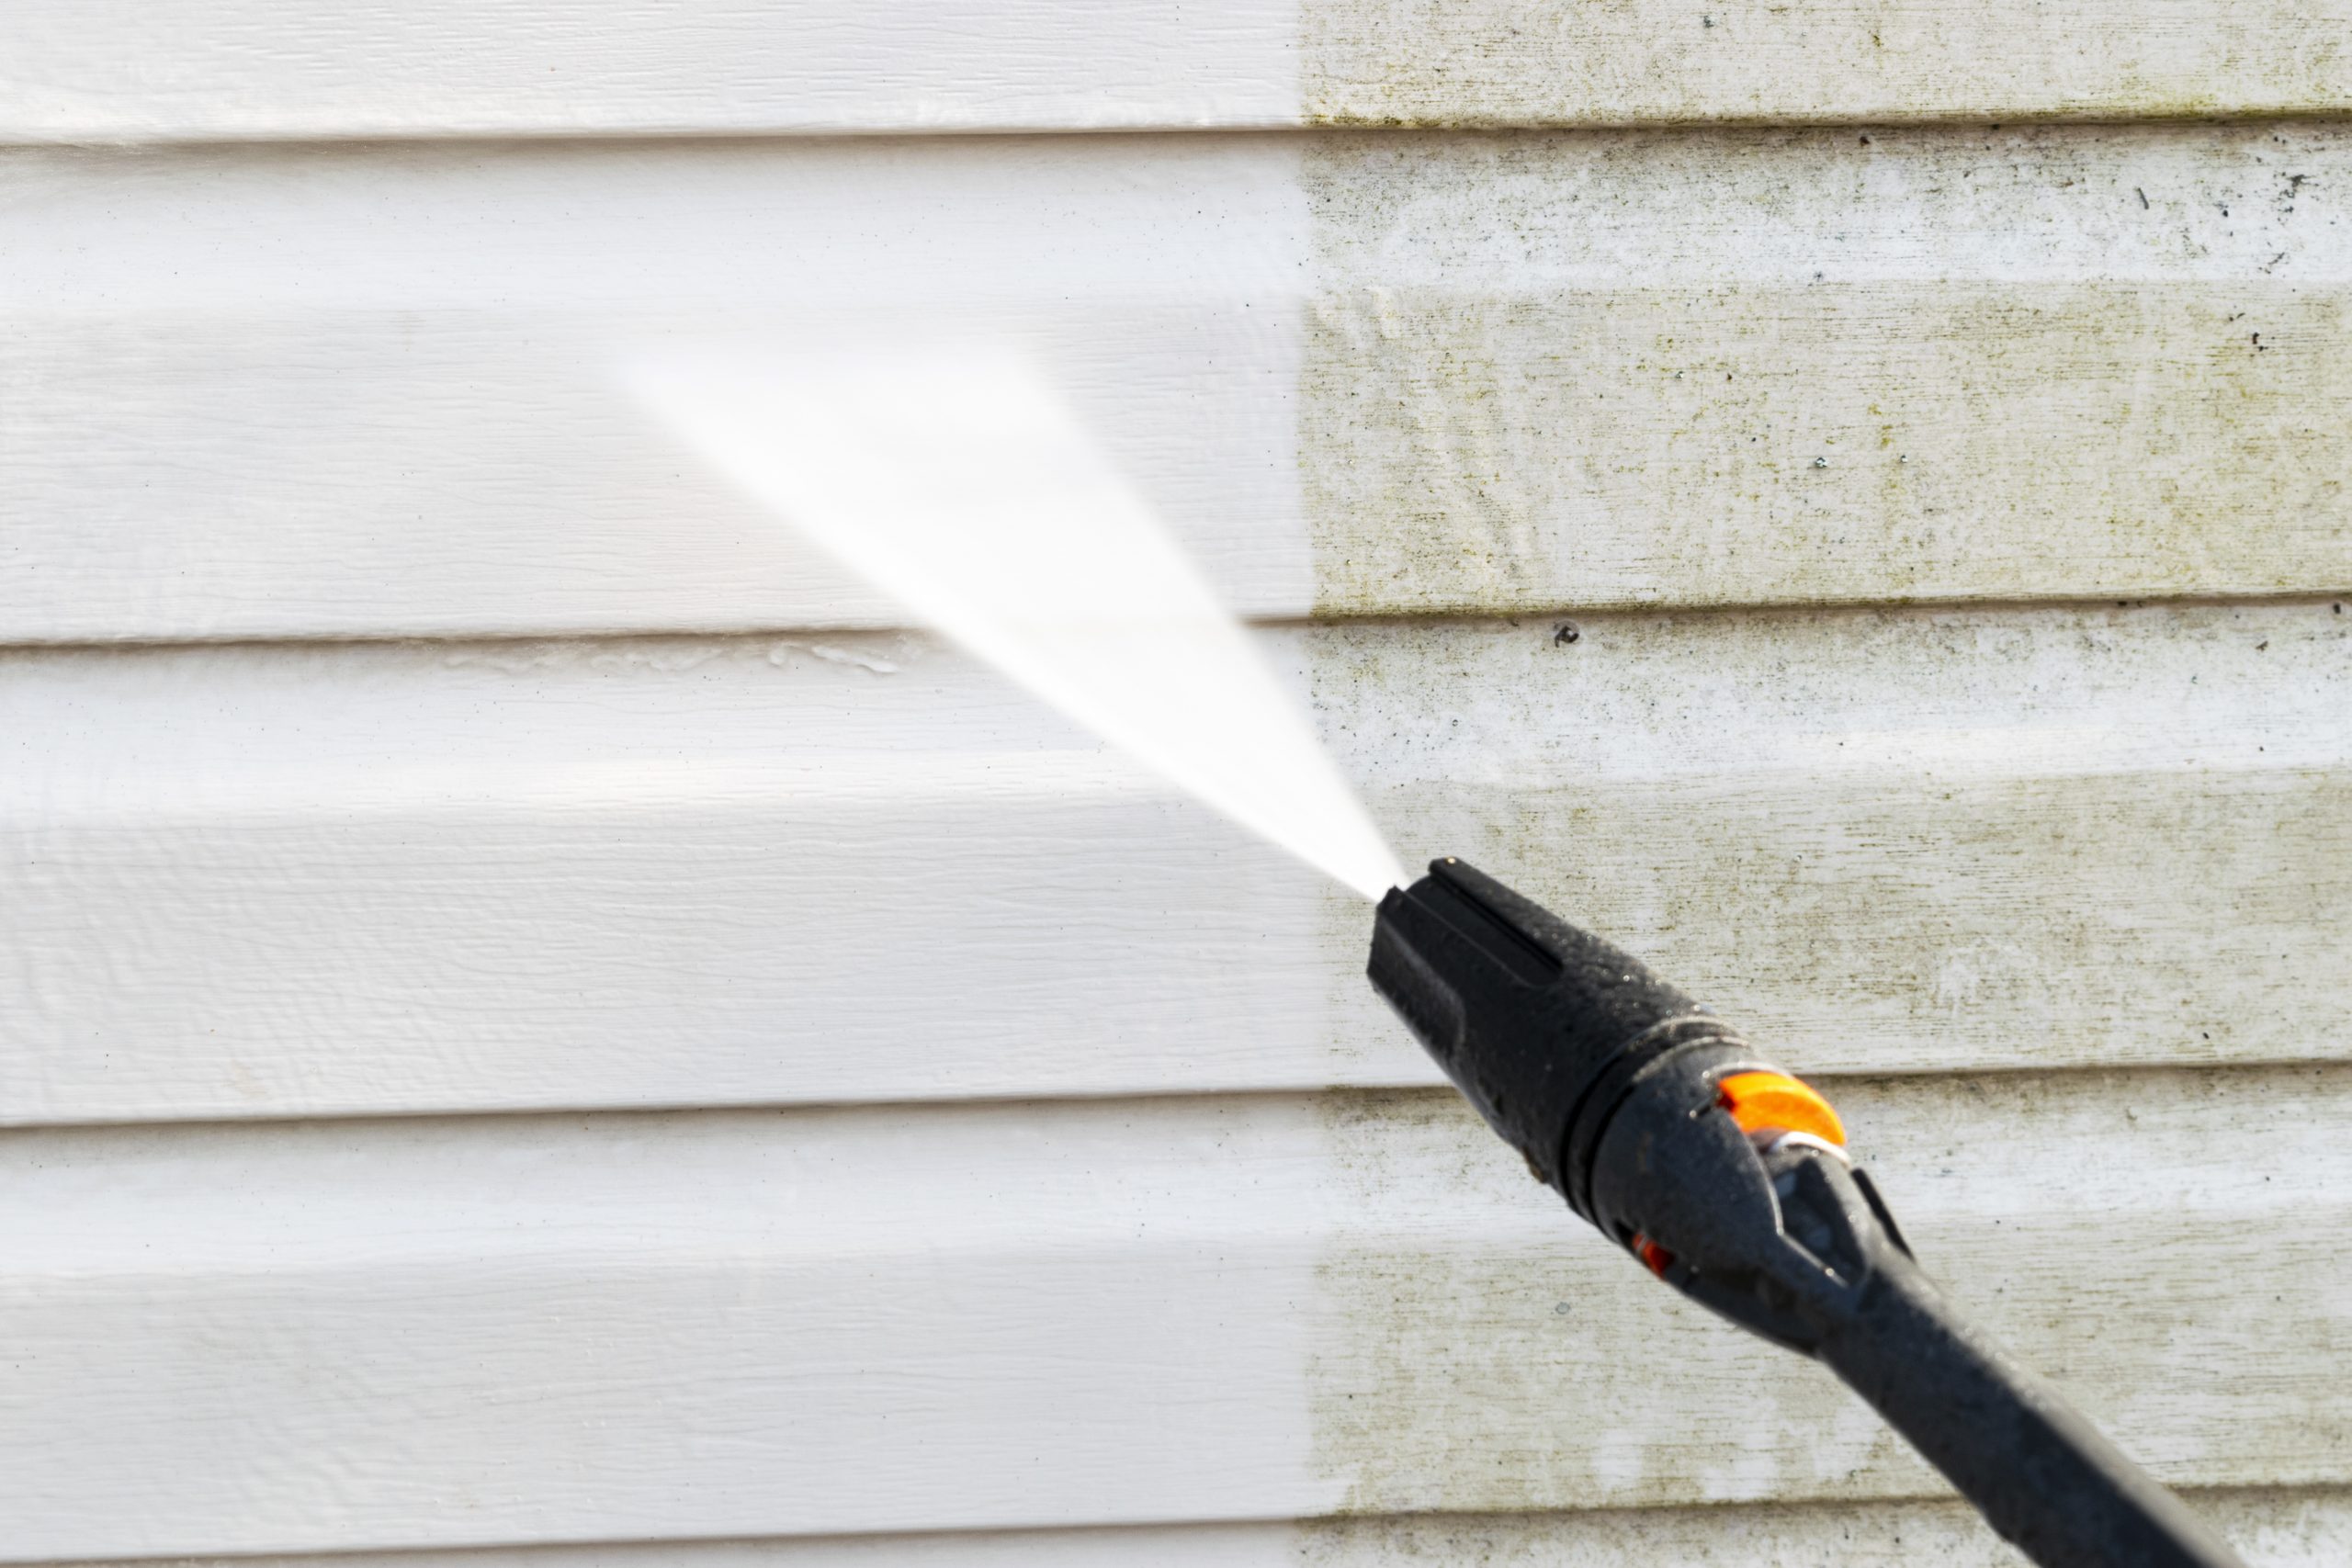 pressure washing service edwardsville illinois vinyl siding cleaned cleaner cleans deck fence cleaning maryville glen carbon ofallon illinois